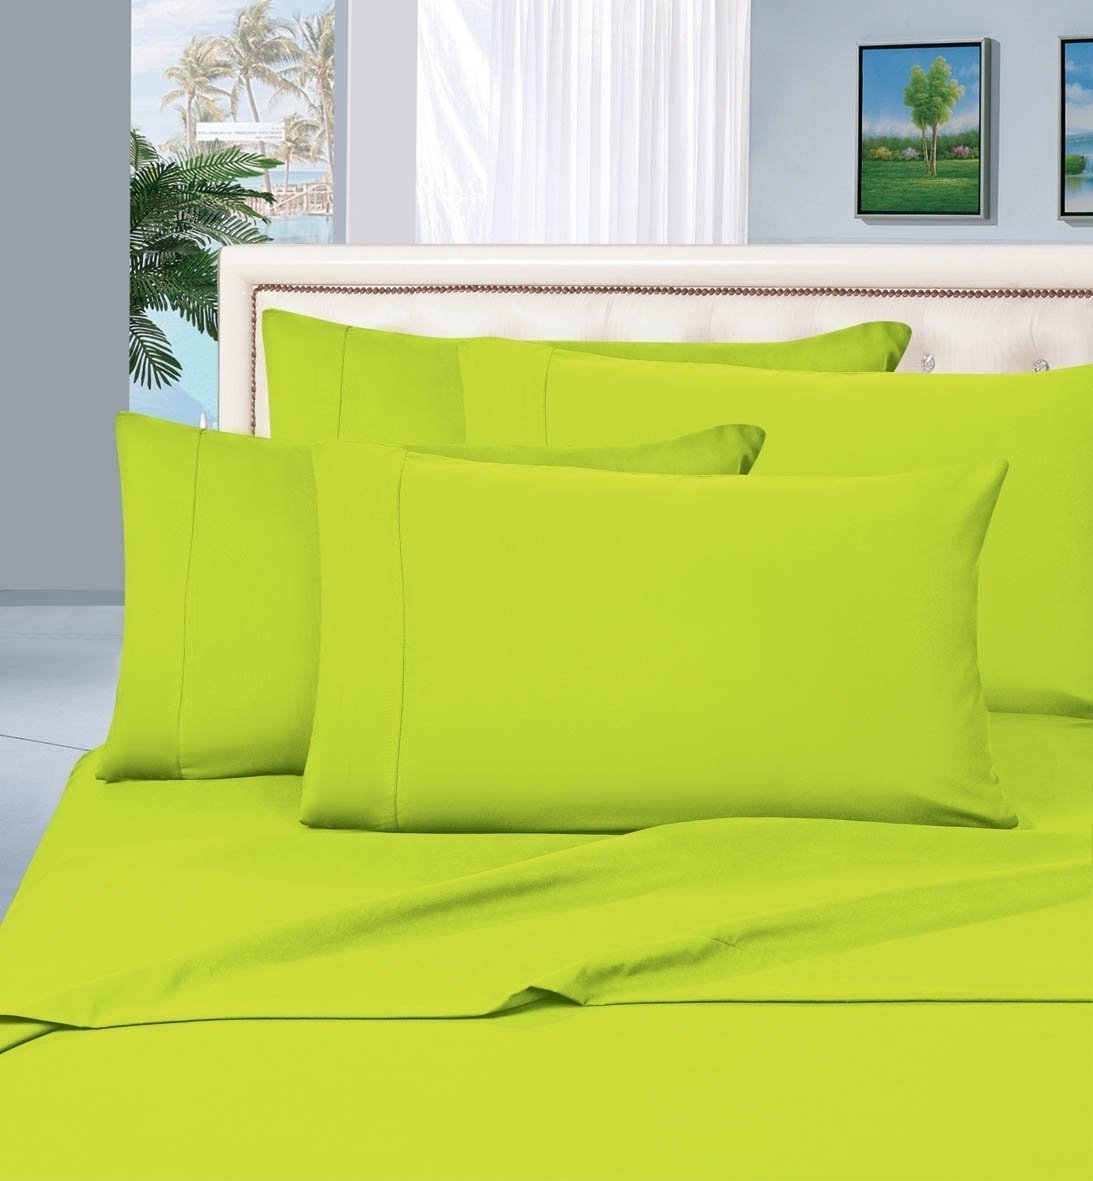 Elegant Comfort 1500 Series Wrinkle Resistant Egyptian Quality Hypoallergenic Ultra Soft Luxury 4-piece Bed Sheet Set, Queen, Lime Green